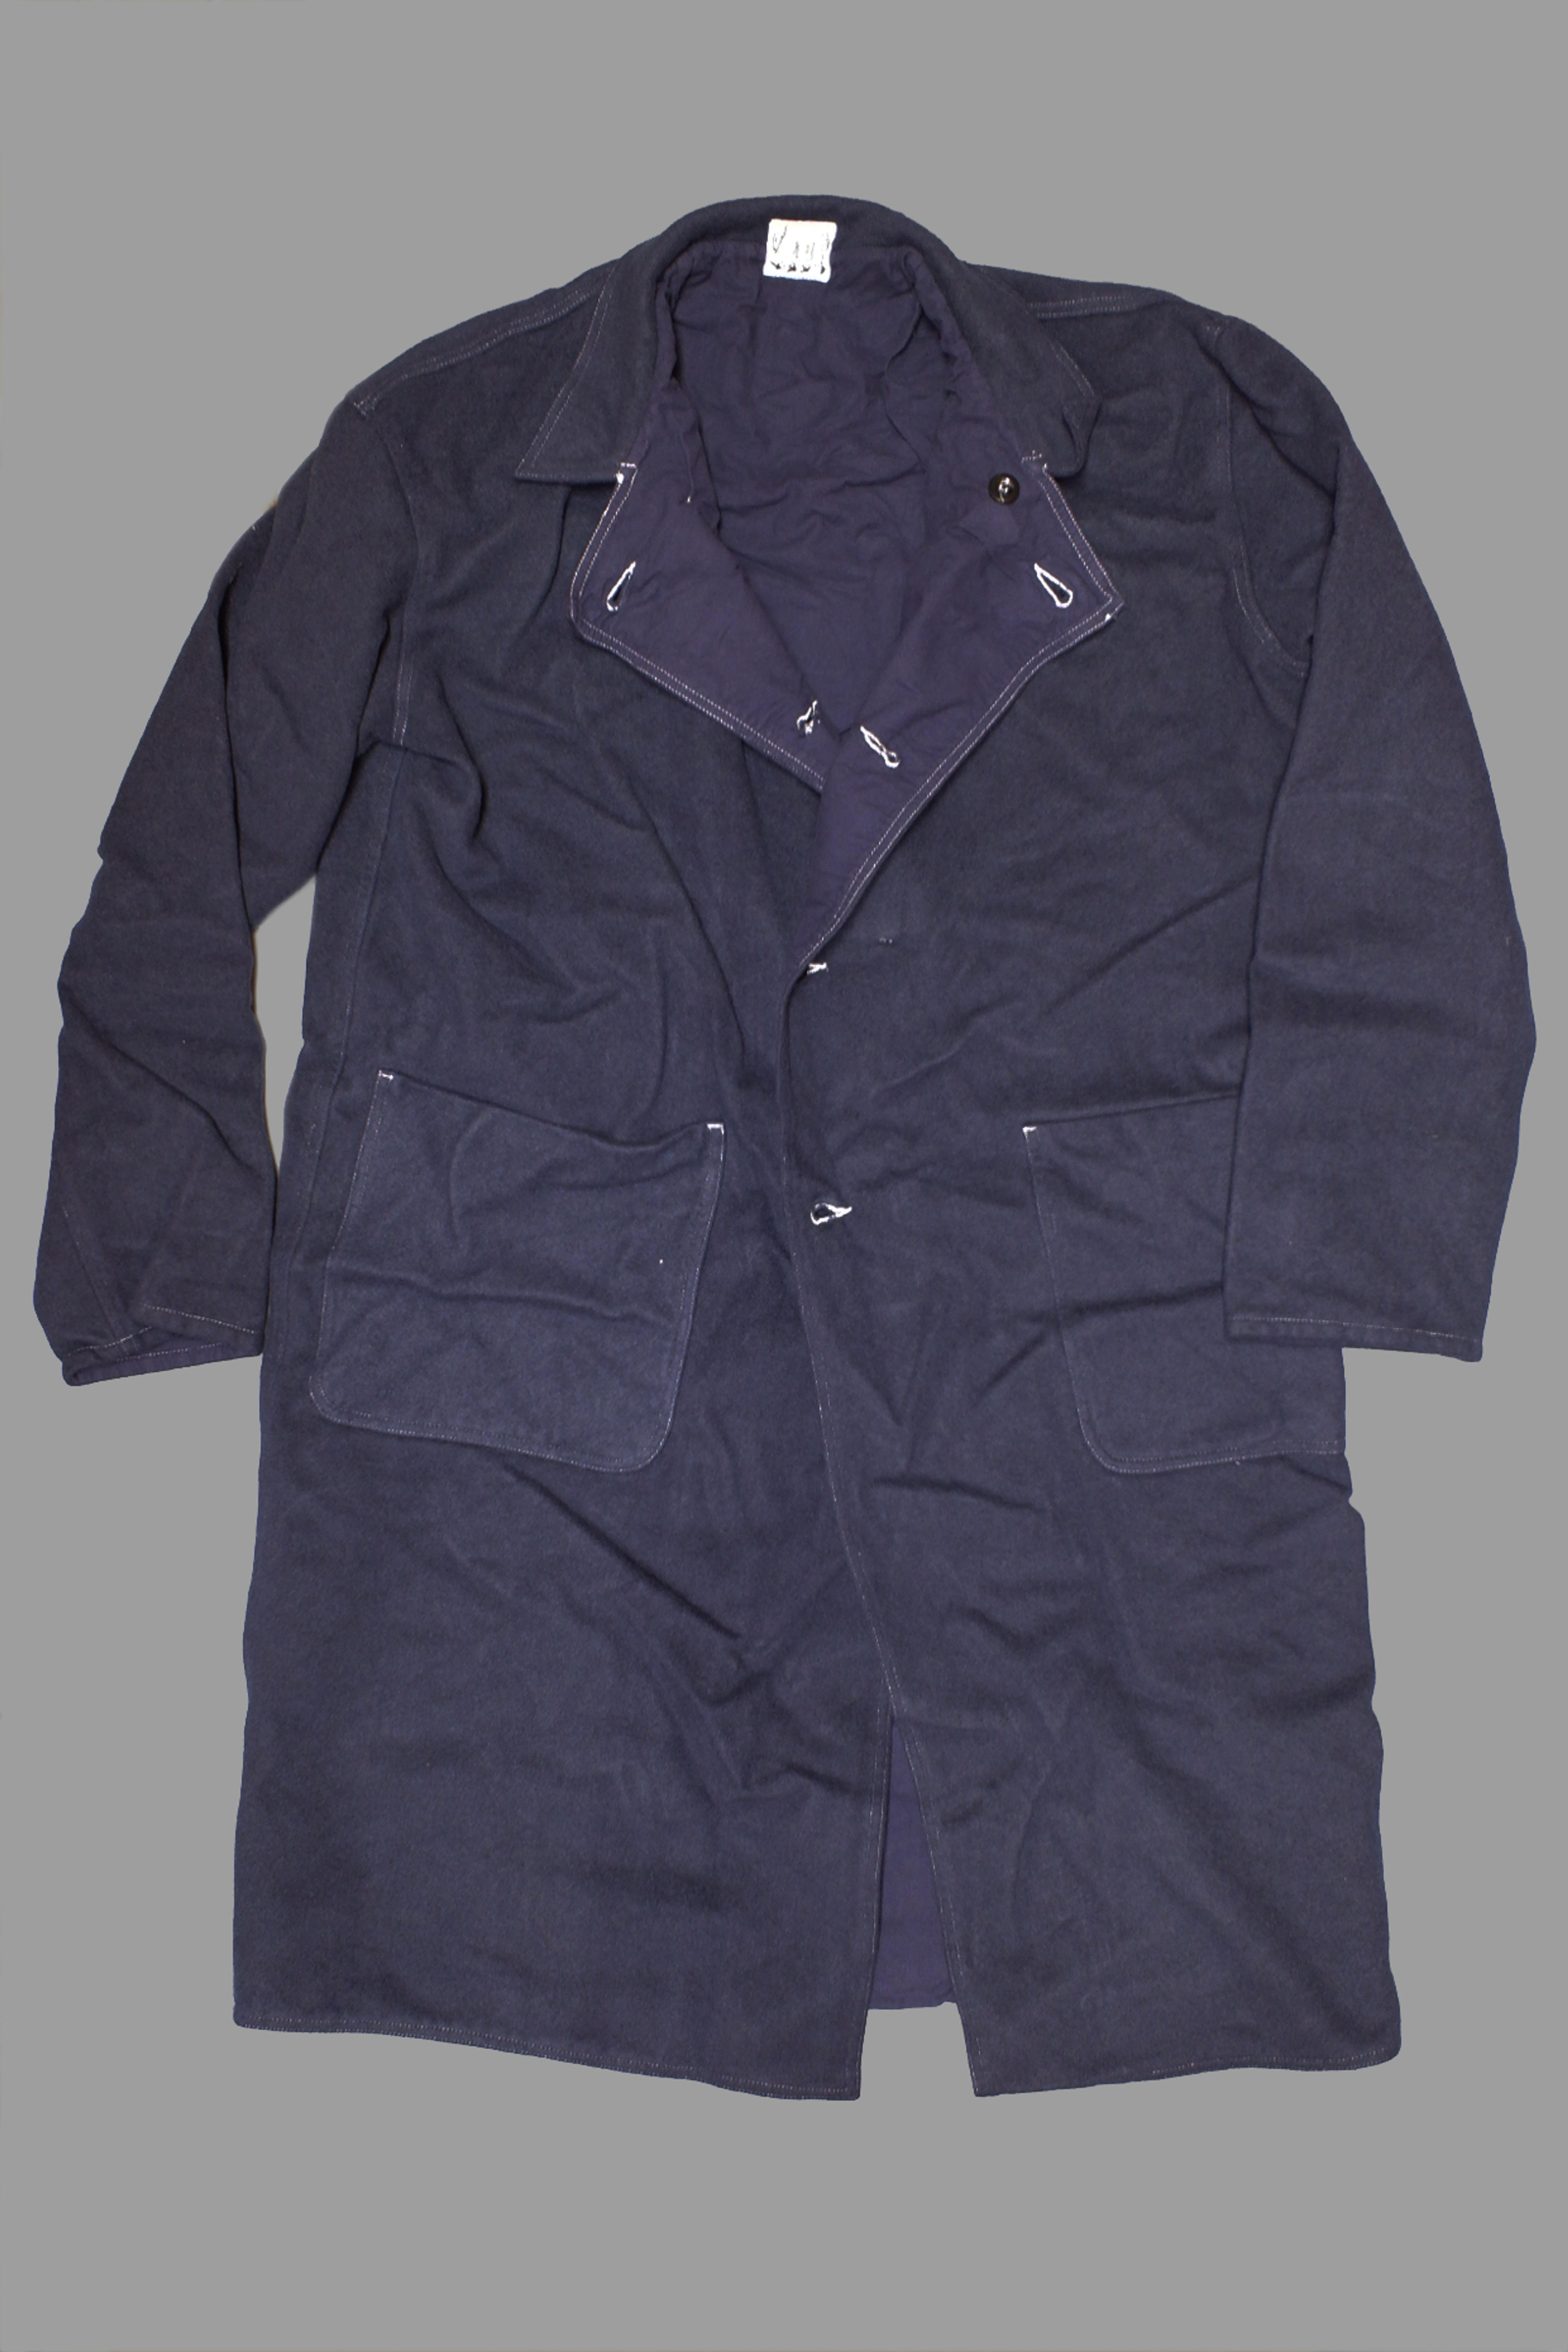 WEAVER’S STOCK TYPE WS969 DOUBLE BREASTED OVERCOAT | TENDER STORES